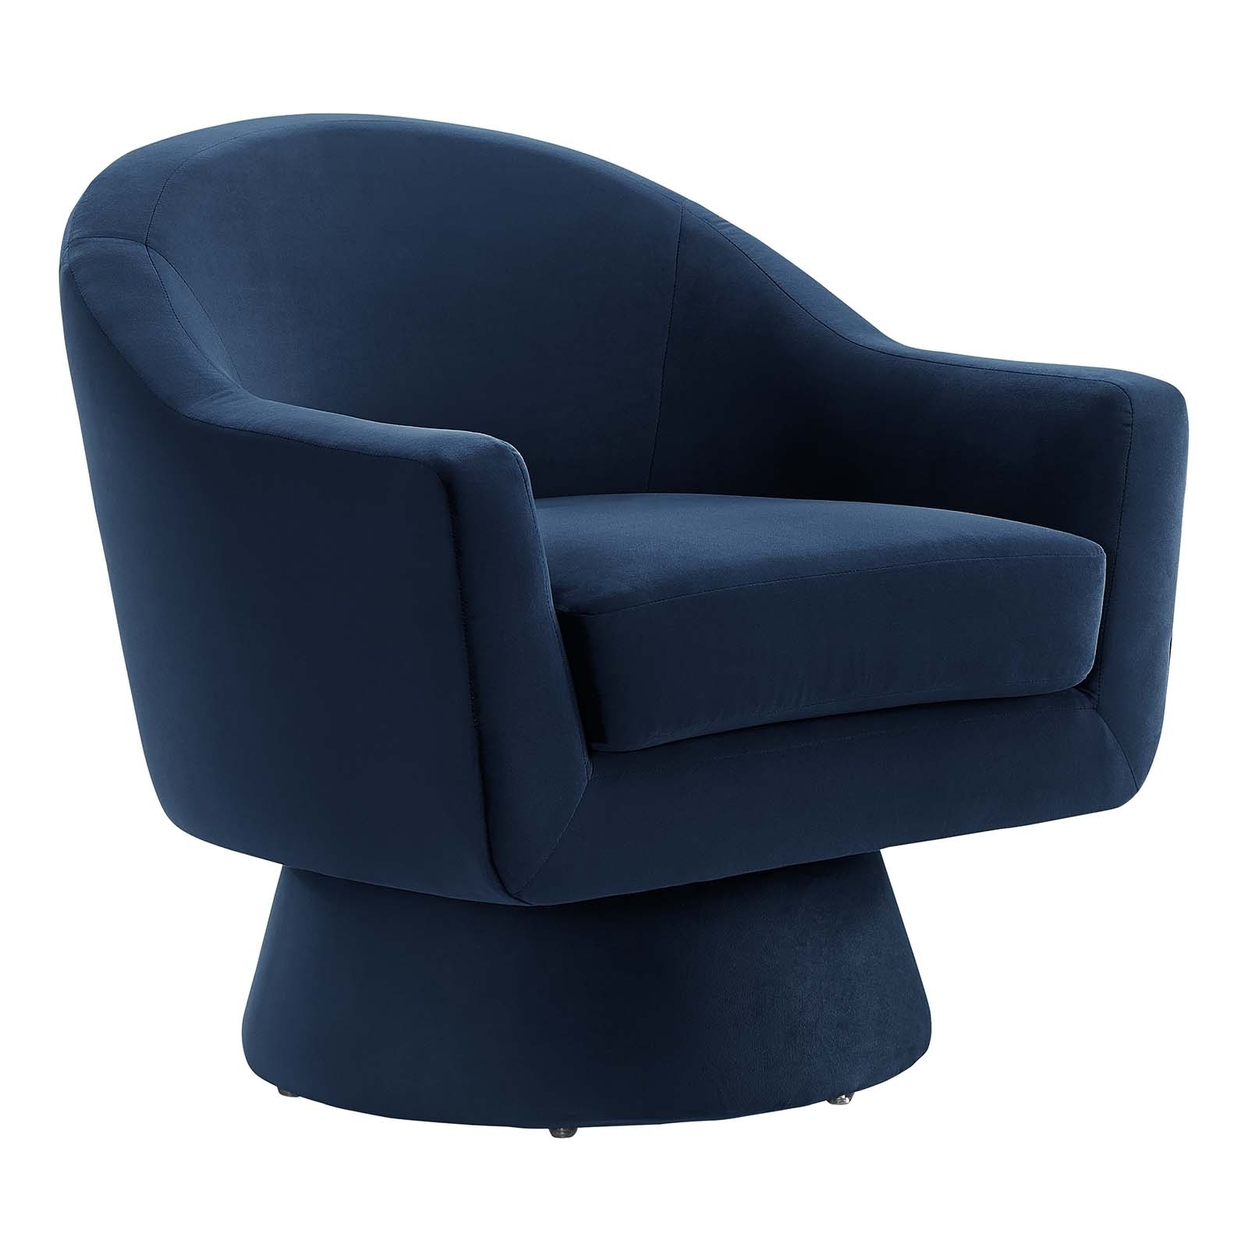 Astral Performance Velvet Fabric And Wood Swivel Chair, Midnight Blue